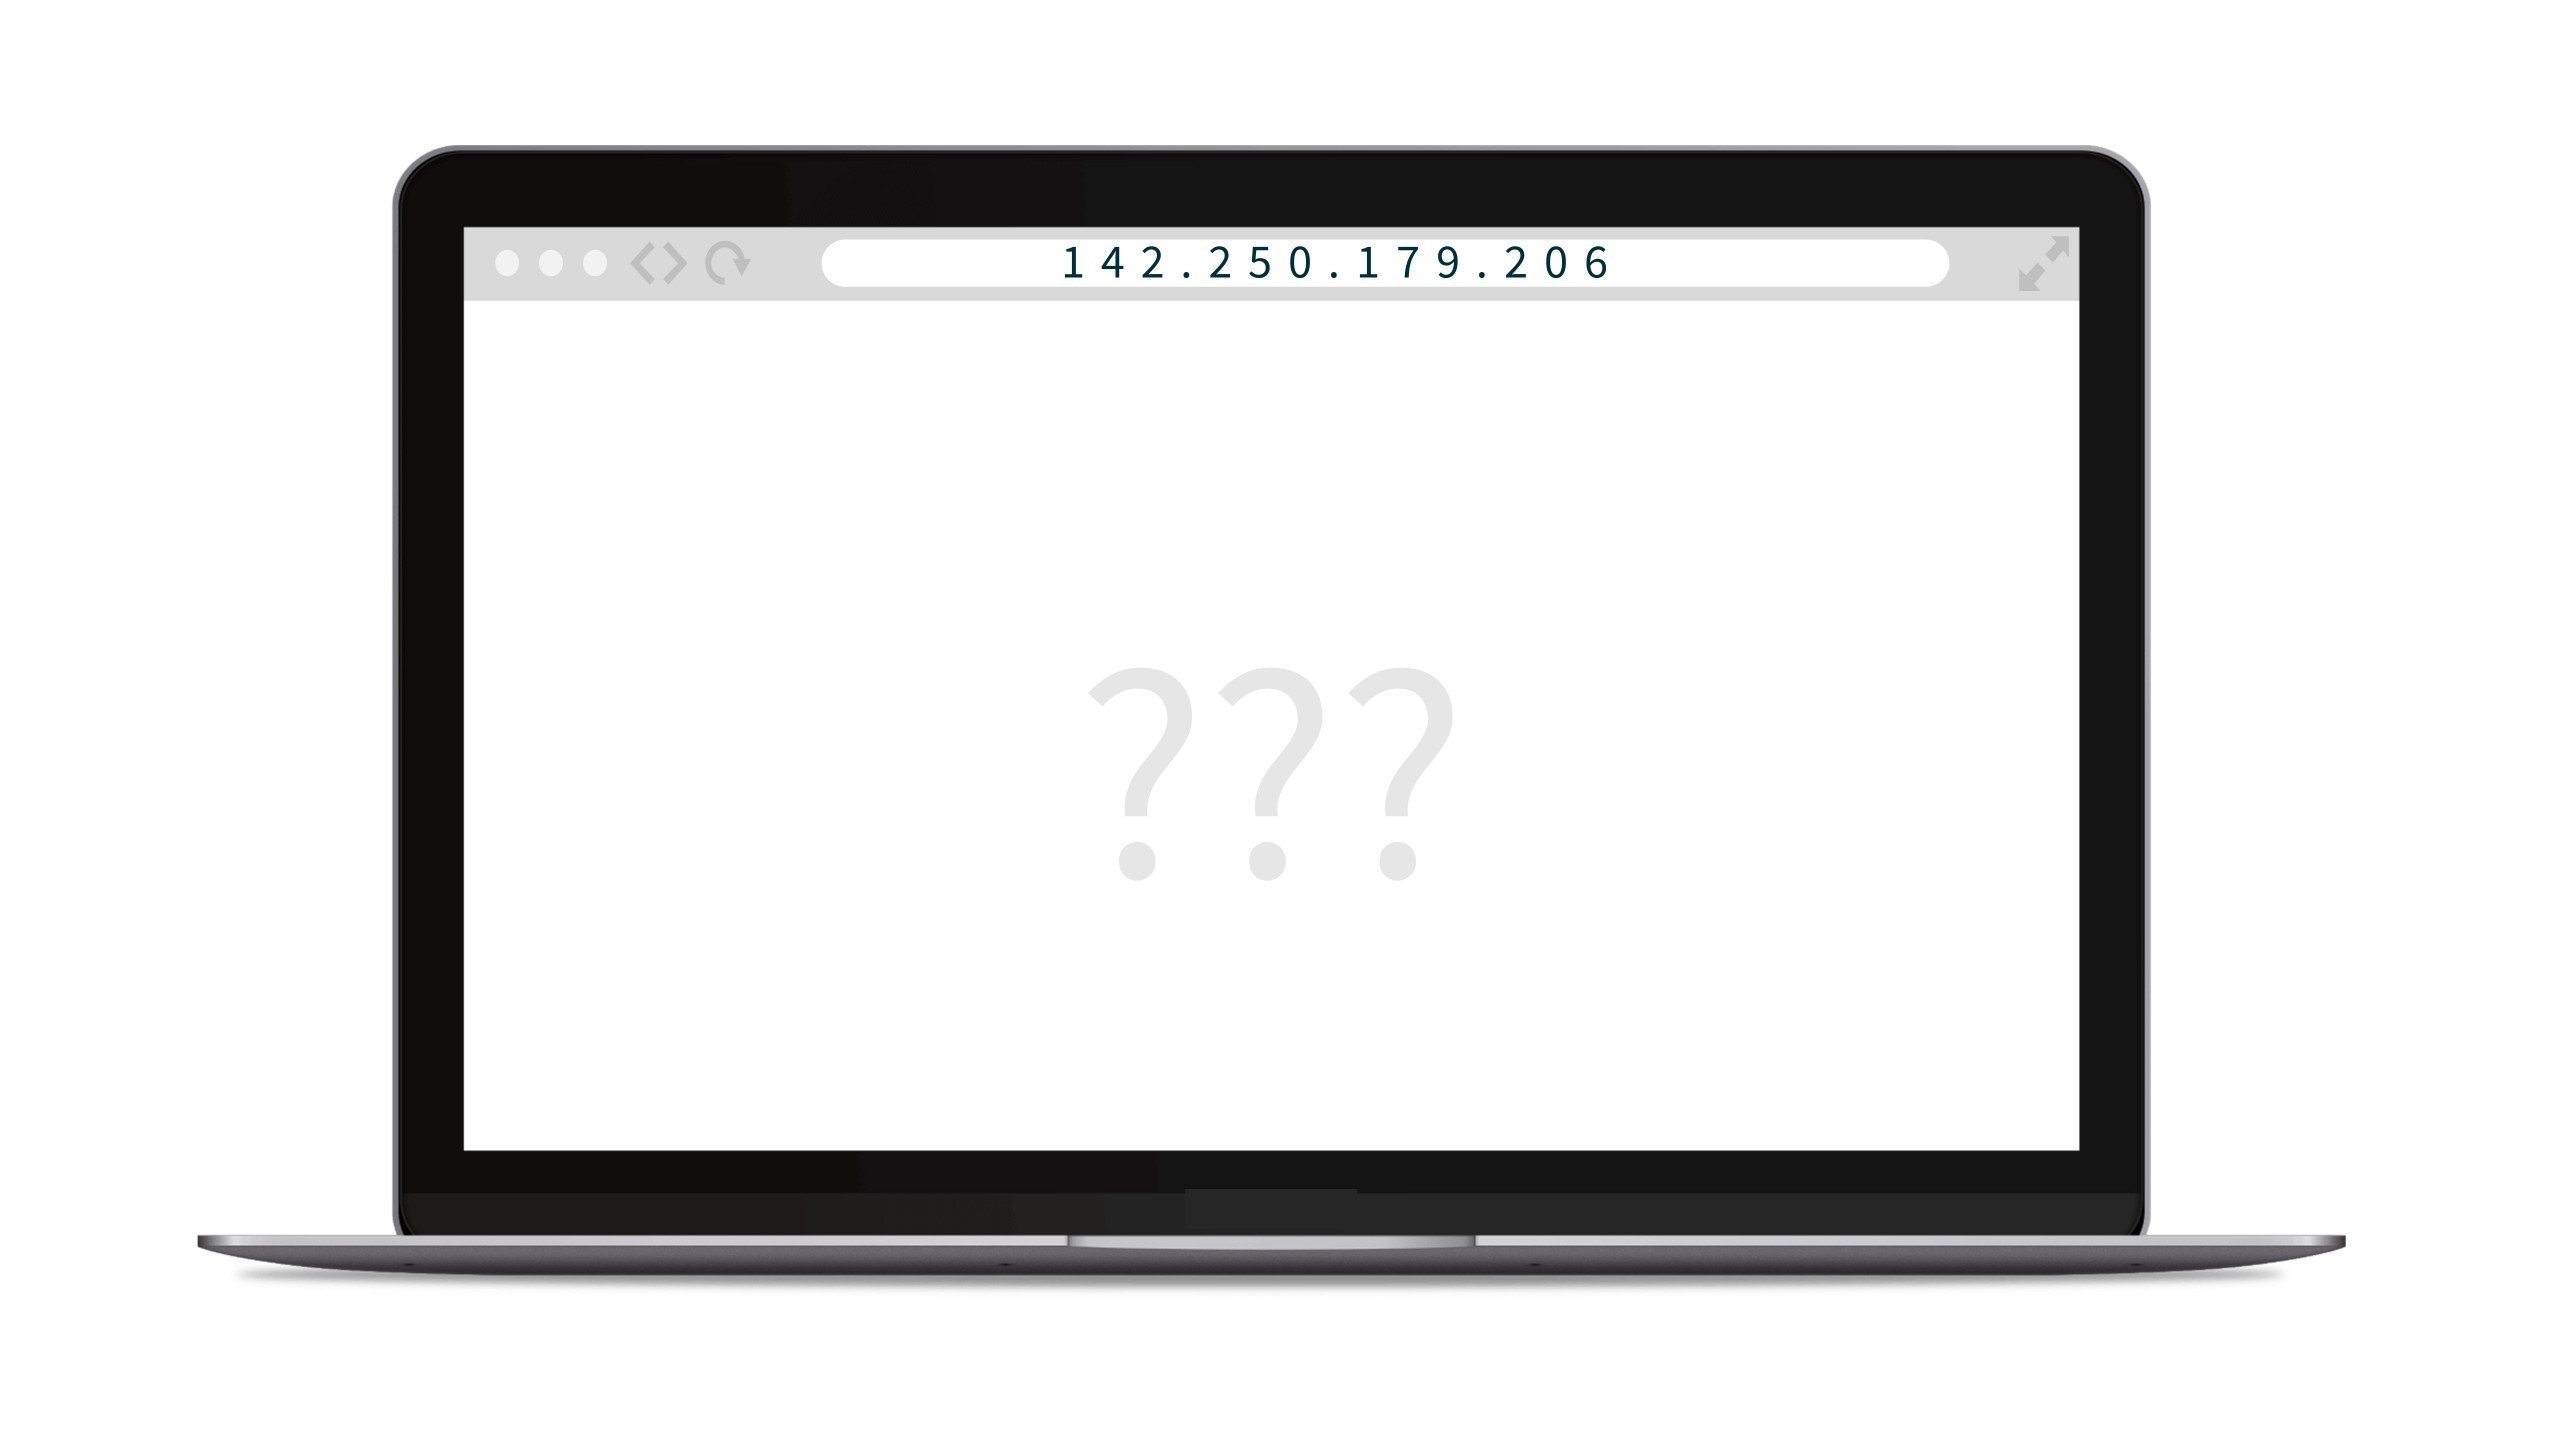 Image of a laptop with an open browser where an IP address was entered in the search bar